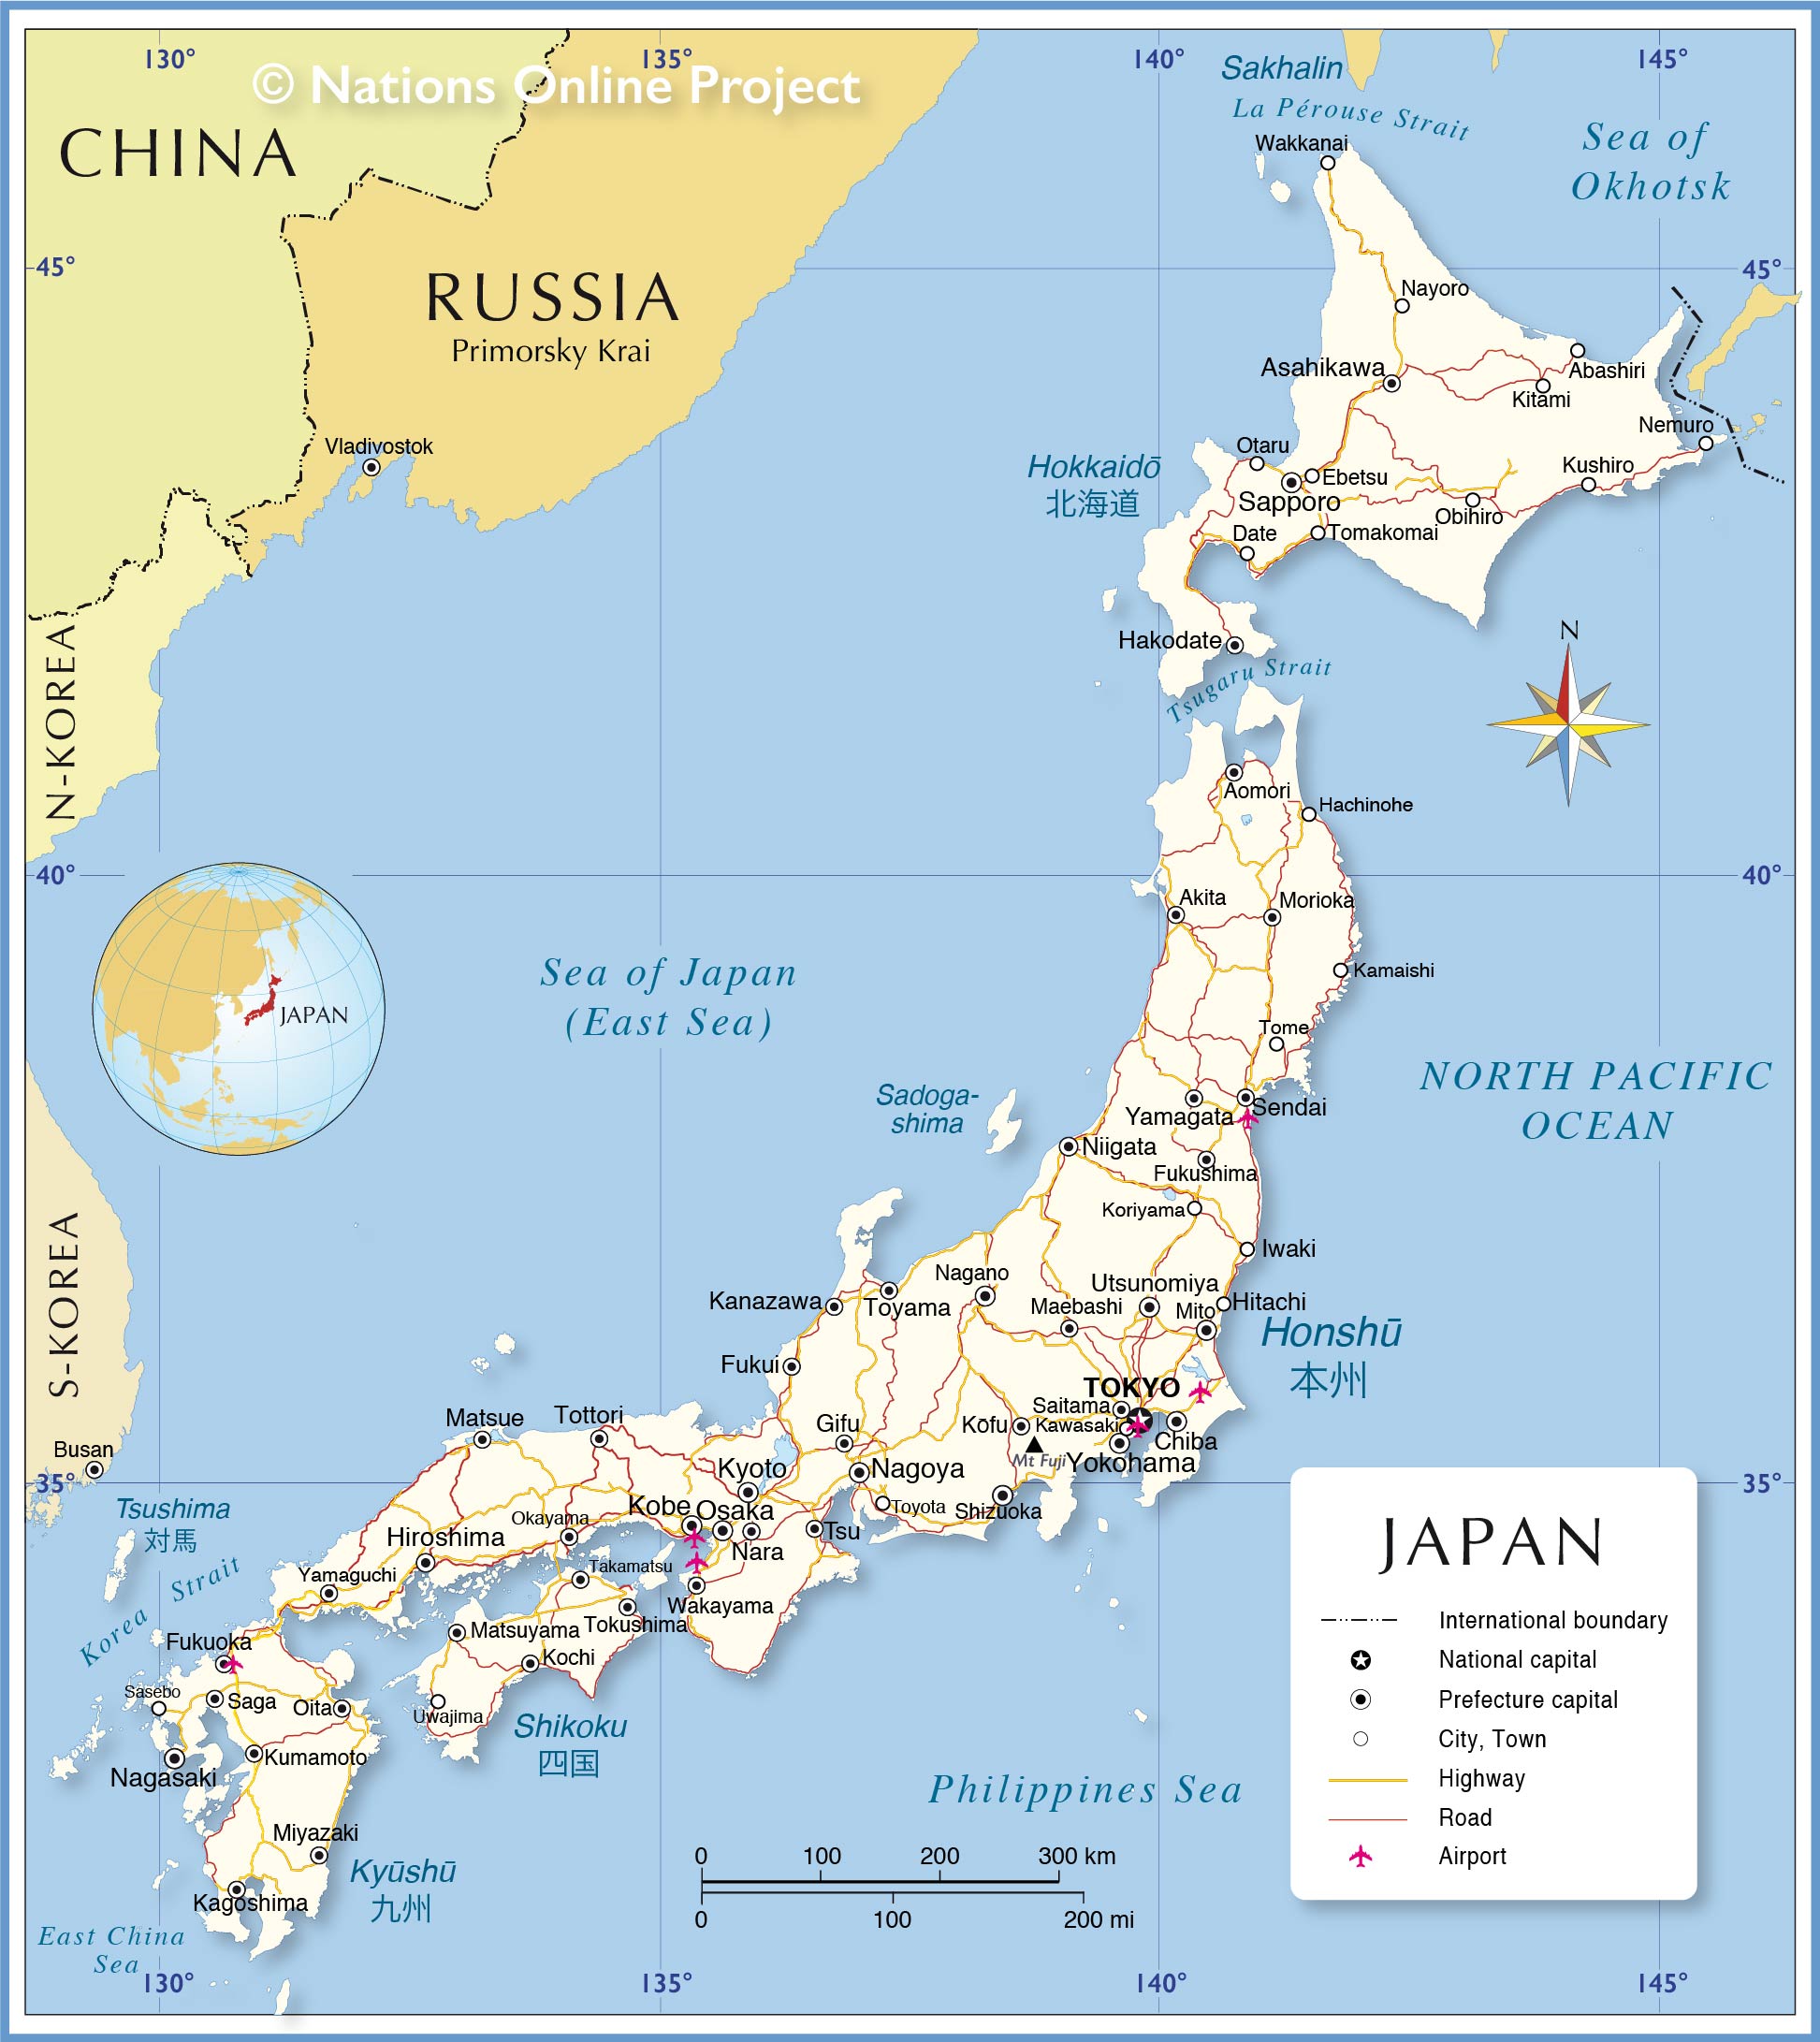 Map Of Japan Major Cities Political Map of Japan   Nations Online Project